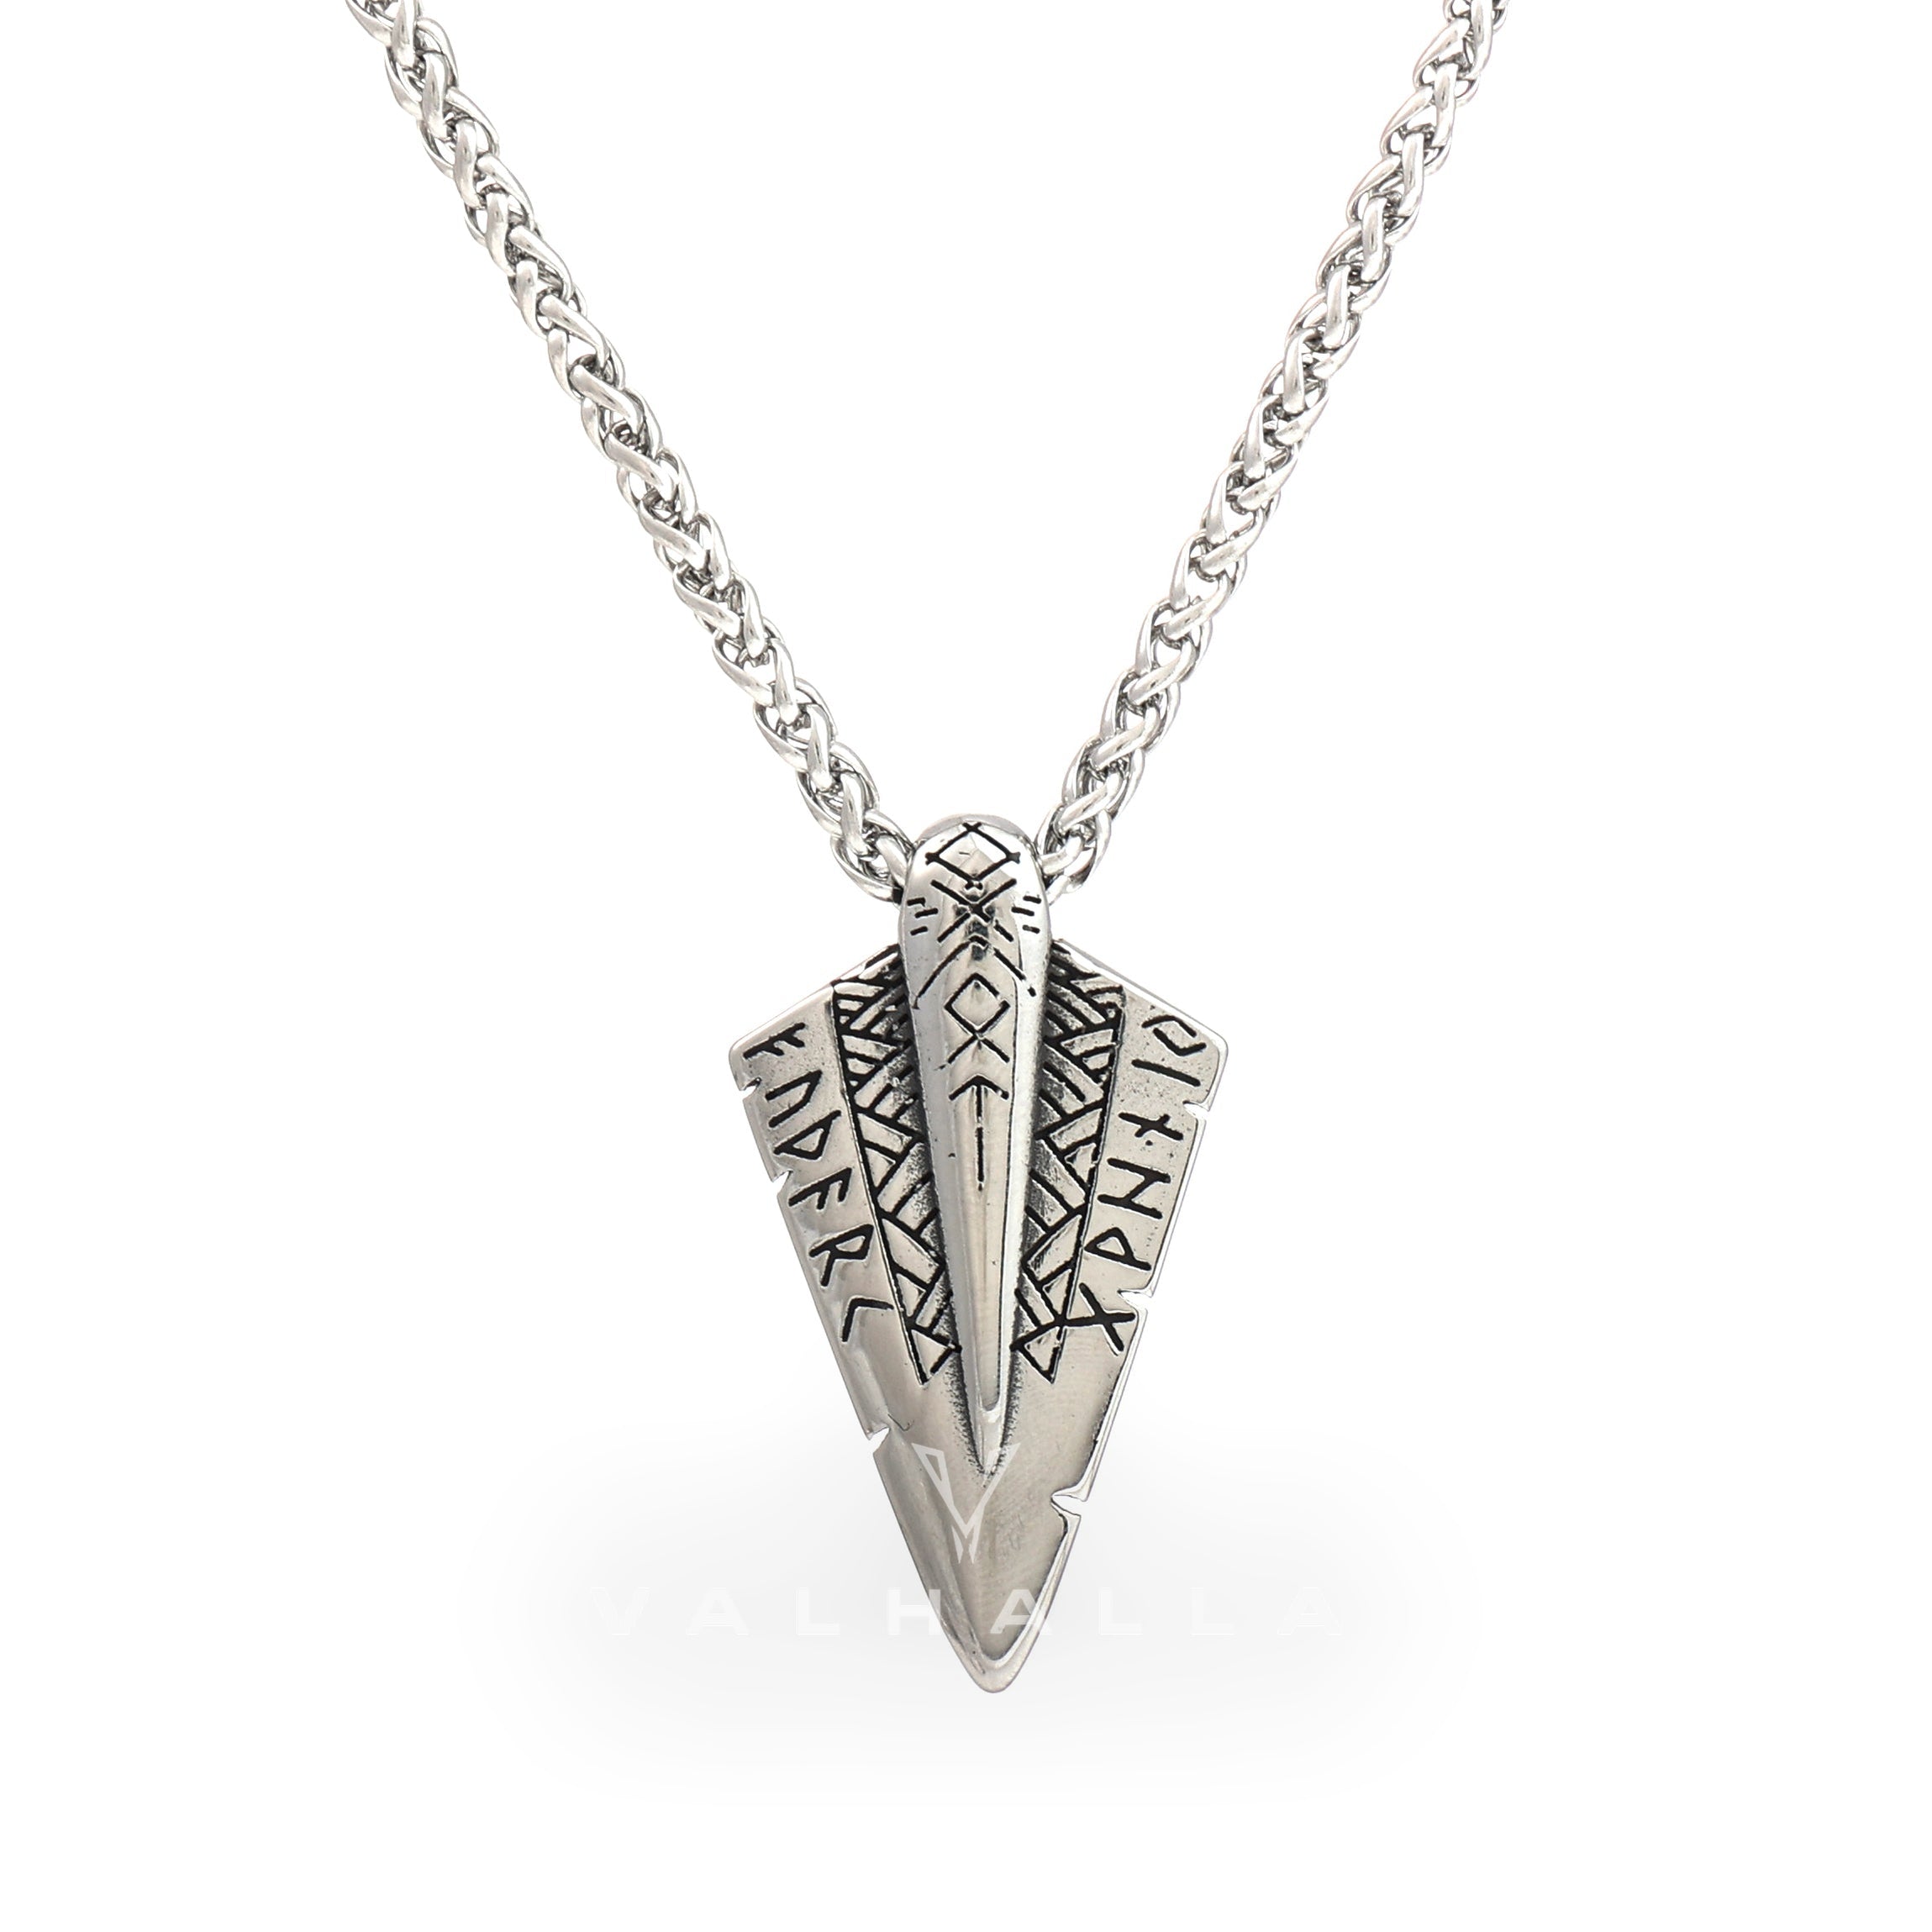 Nordic Spear Of Odin Stainless Steel Viking Pendant & Chain